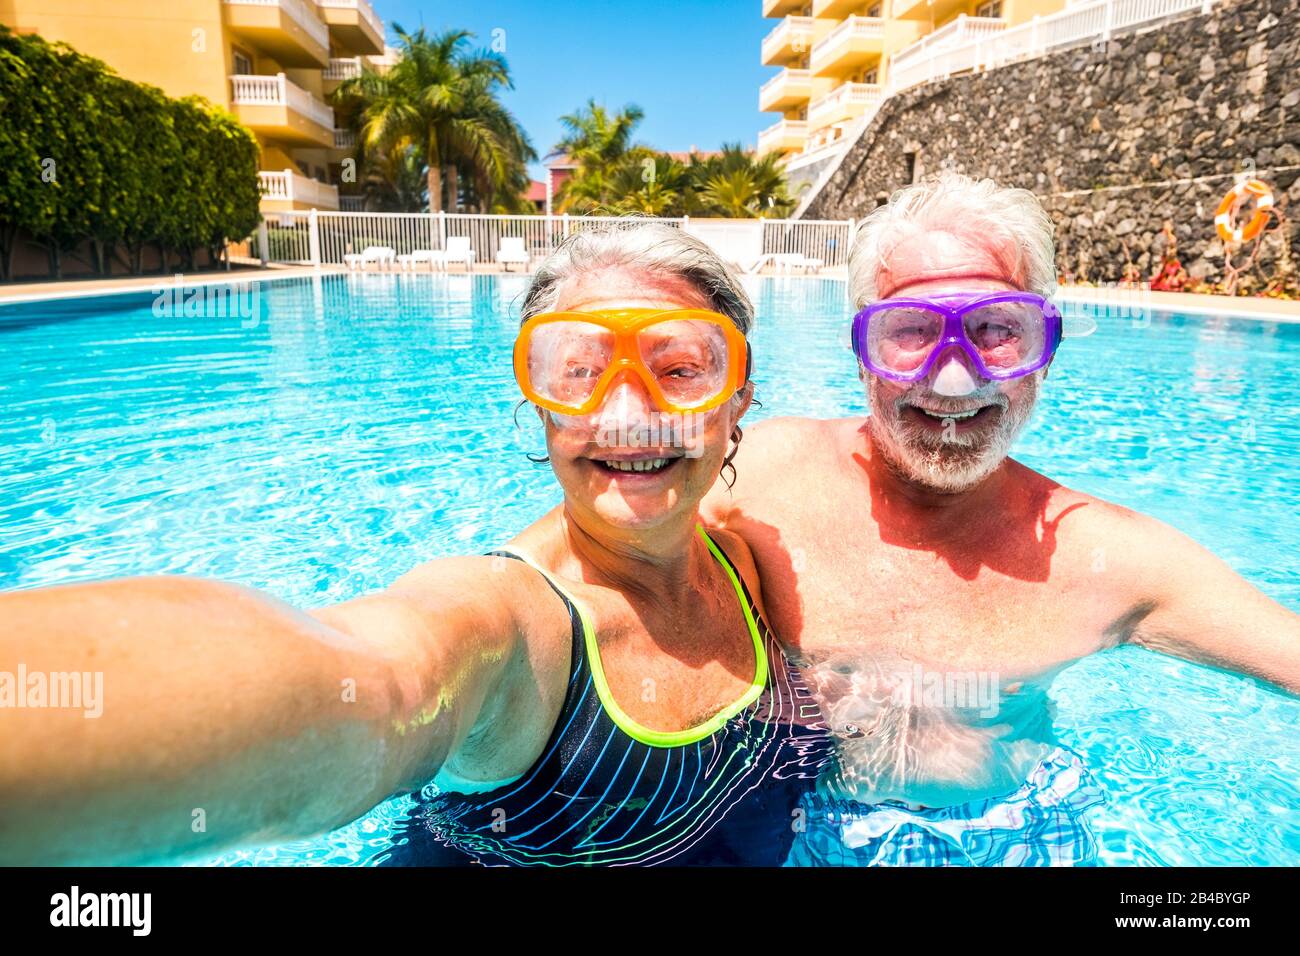 Happy cheerful people old senior man and woman have fun together in the summer swimming pool activity taking selfie pictures with scuba masks on the face for funny outdoor leisure activity in hotel holiday vacation Stock Photo